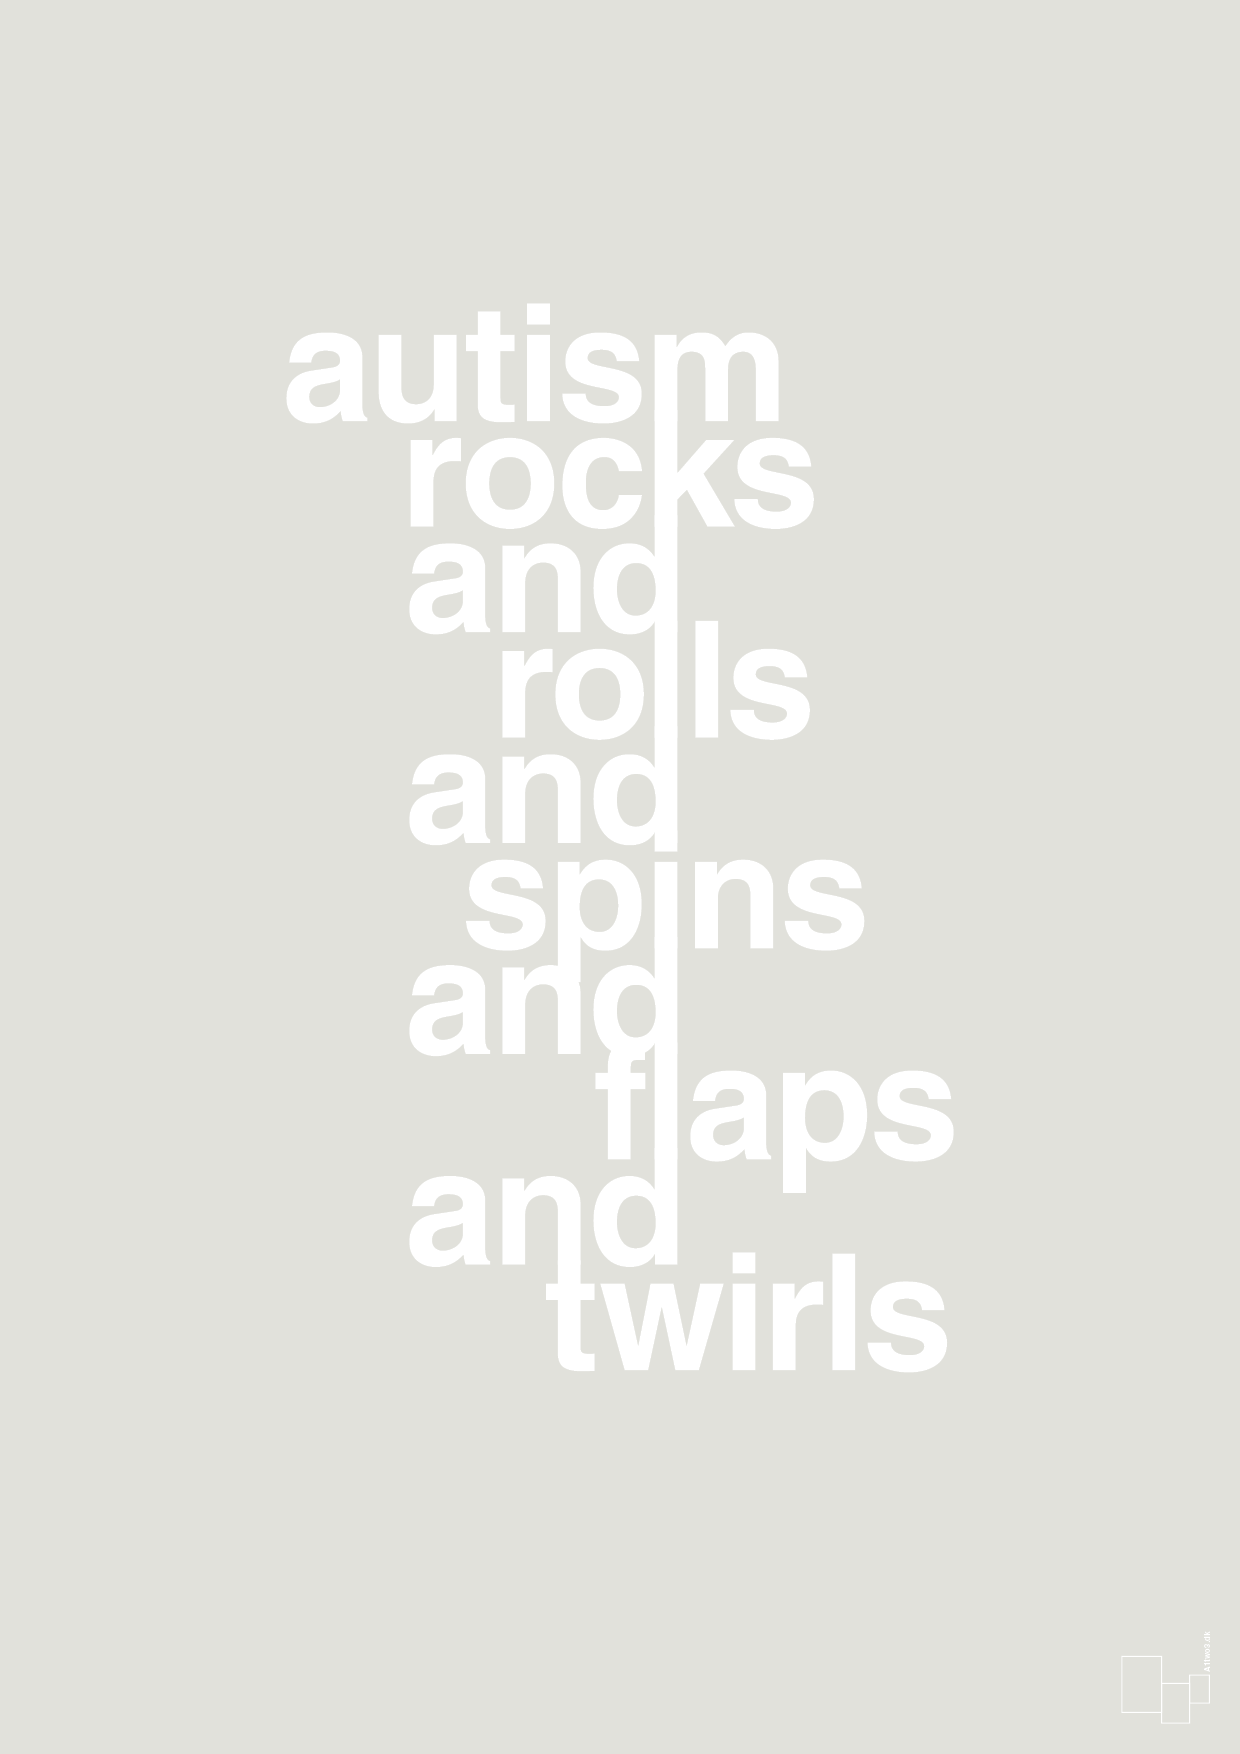 autism rocks and rolls and spins and flaps and twirls - Plakat med Samfund i Painters White